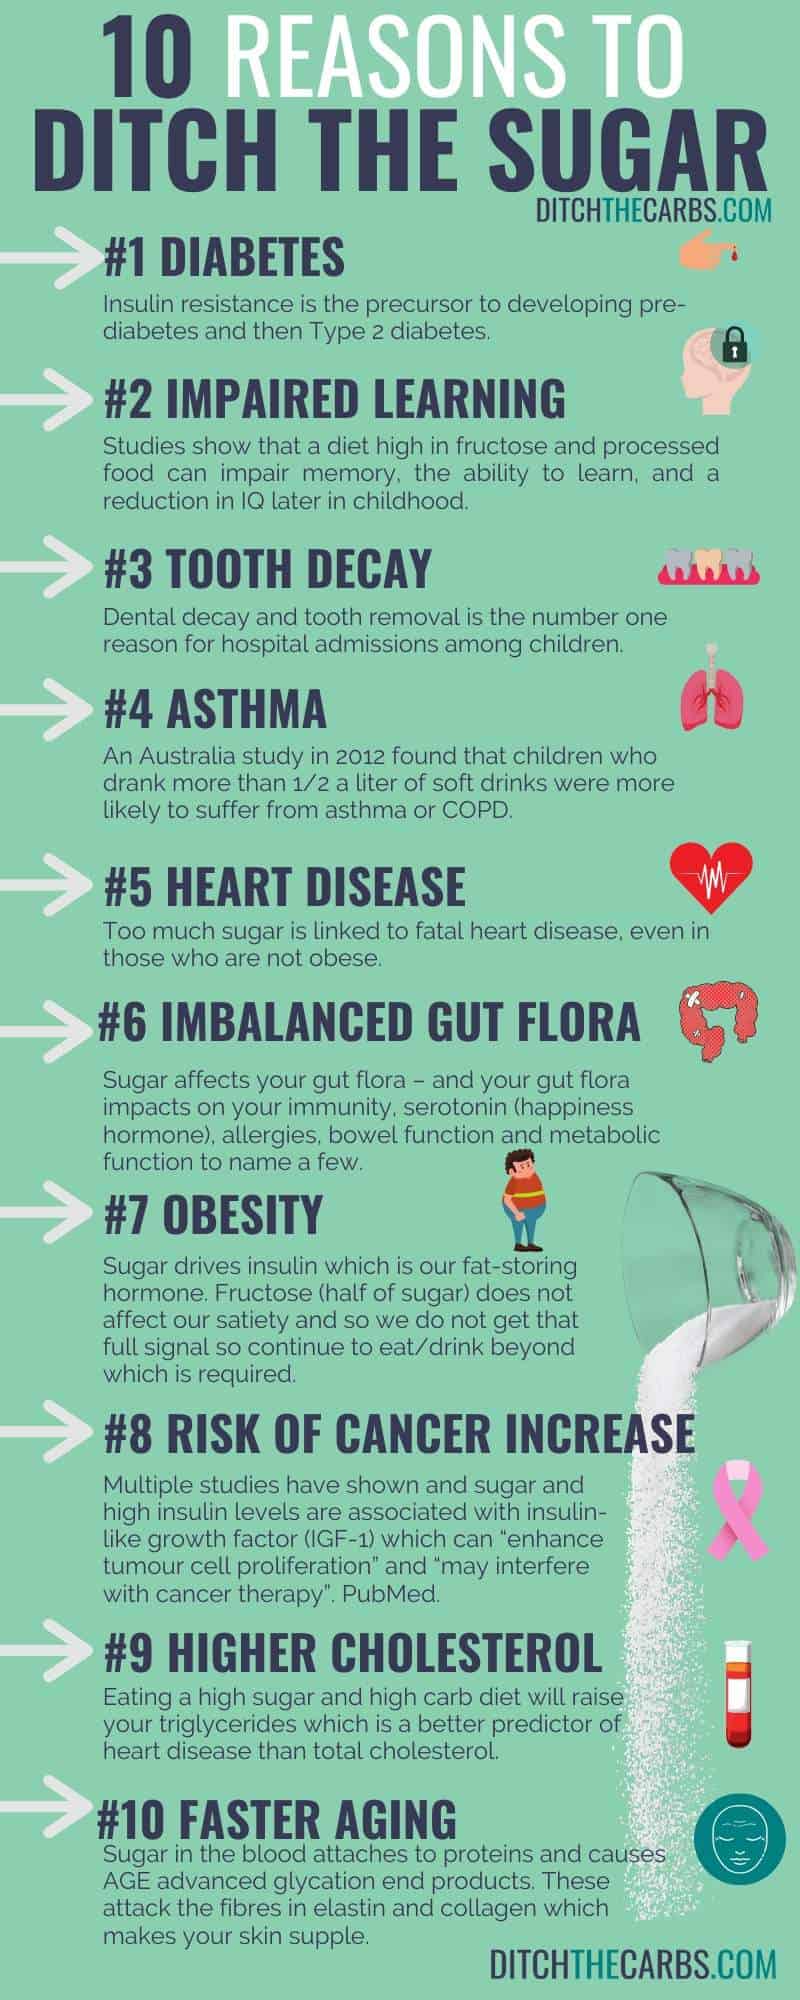 Top 10 reasons why sugar is bad for us (PLUS 20 more).